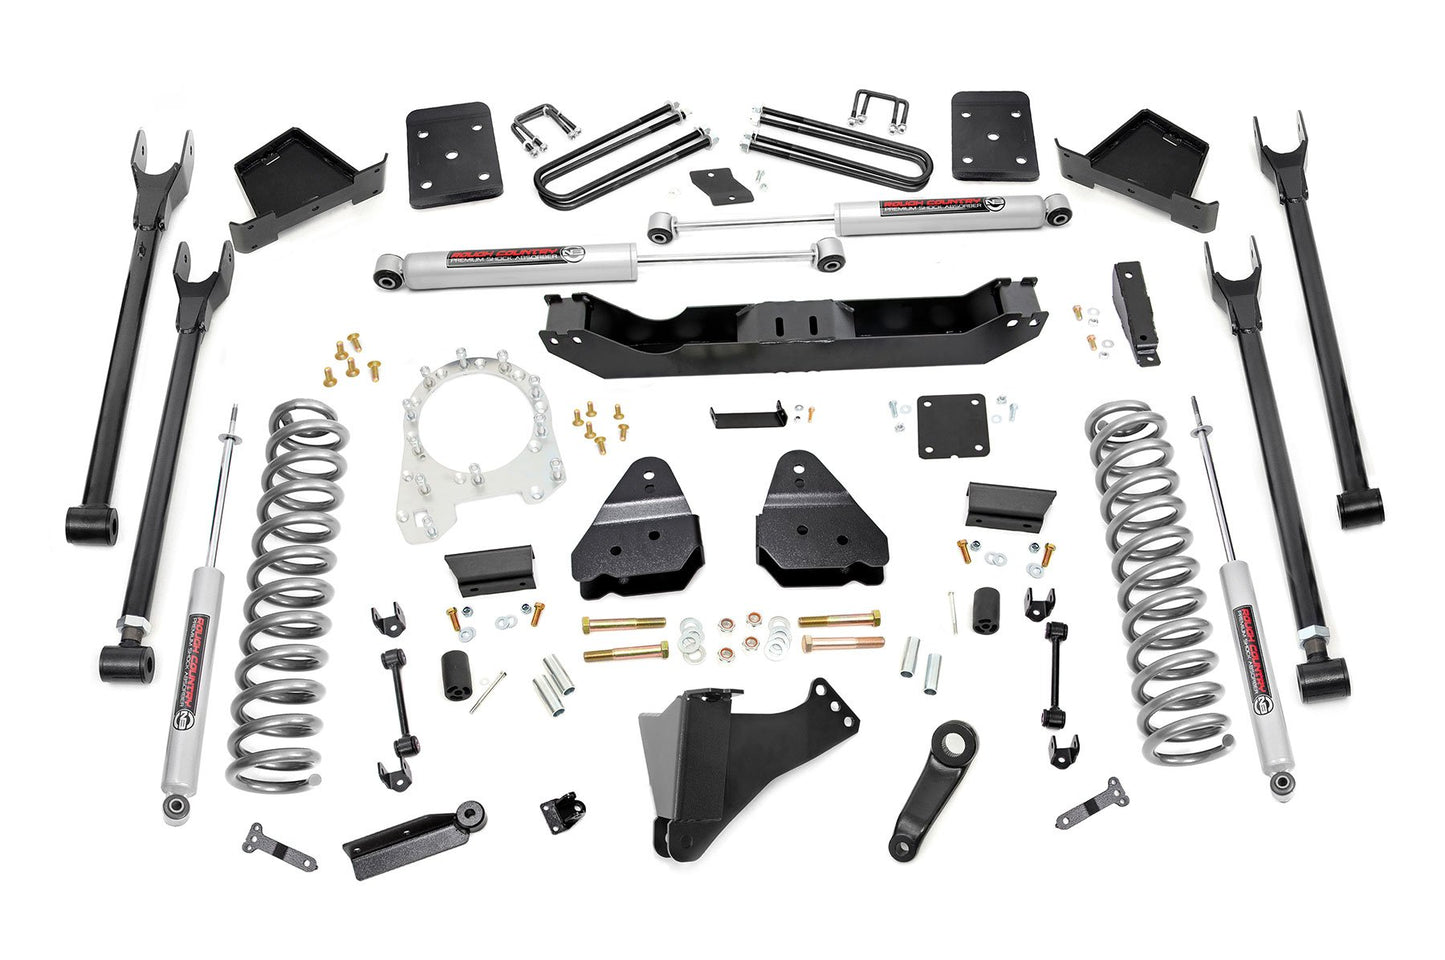 Rough Country 6 Inch Lift Kit | Diesel | 4-Link | No OVLD | Ford F-250/F-350 Super Duty (17-22)